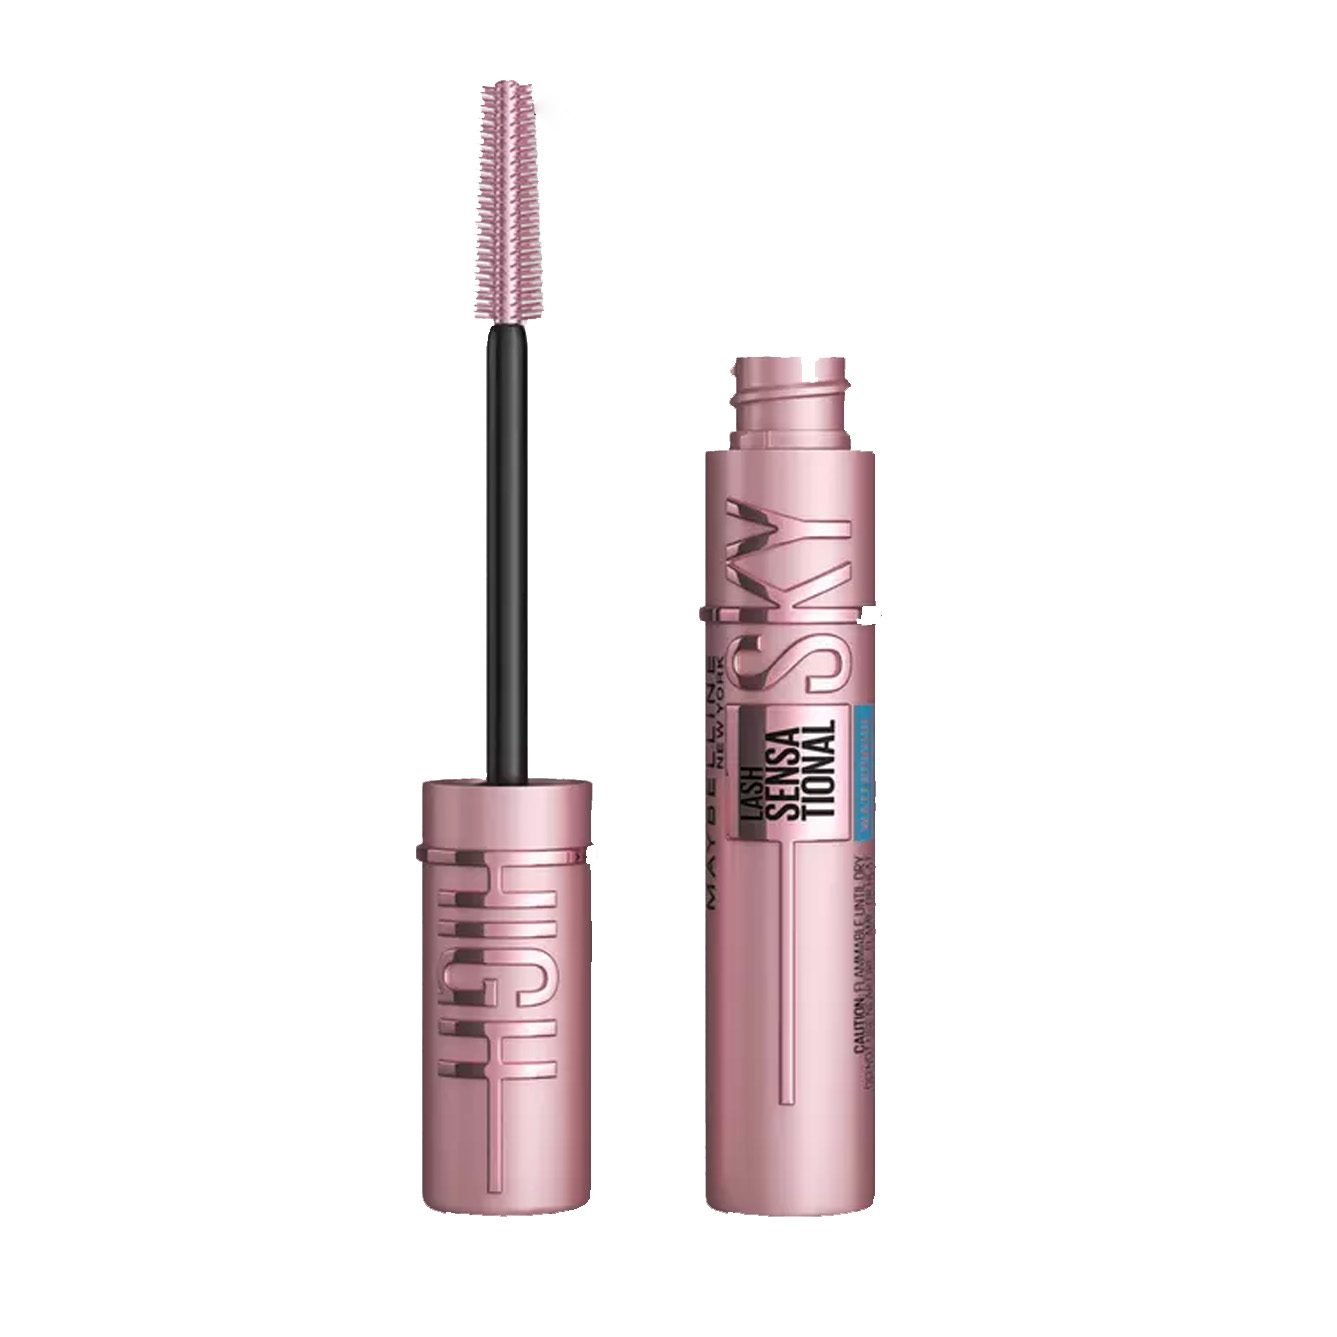 Maybelline Lash Sensational Sky High Waterproof Mascara in pink tube with matching wand